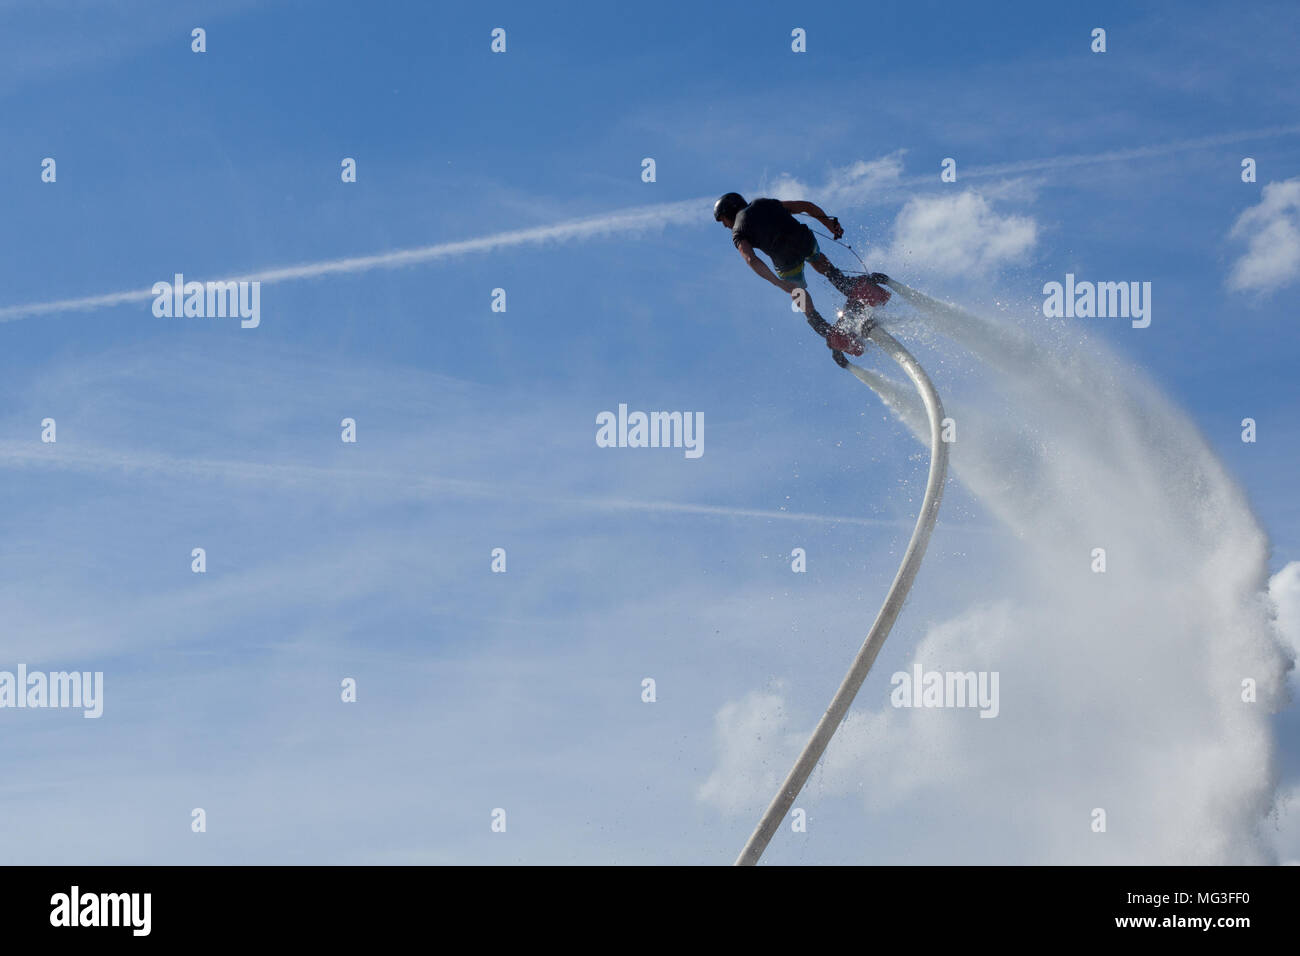 Flyboard - man exibition. Flyboarding session in the aquamarine waters. Stock Photo